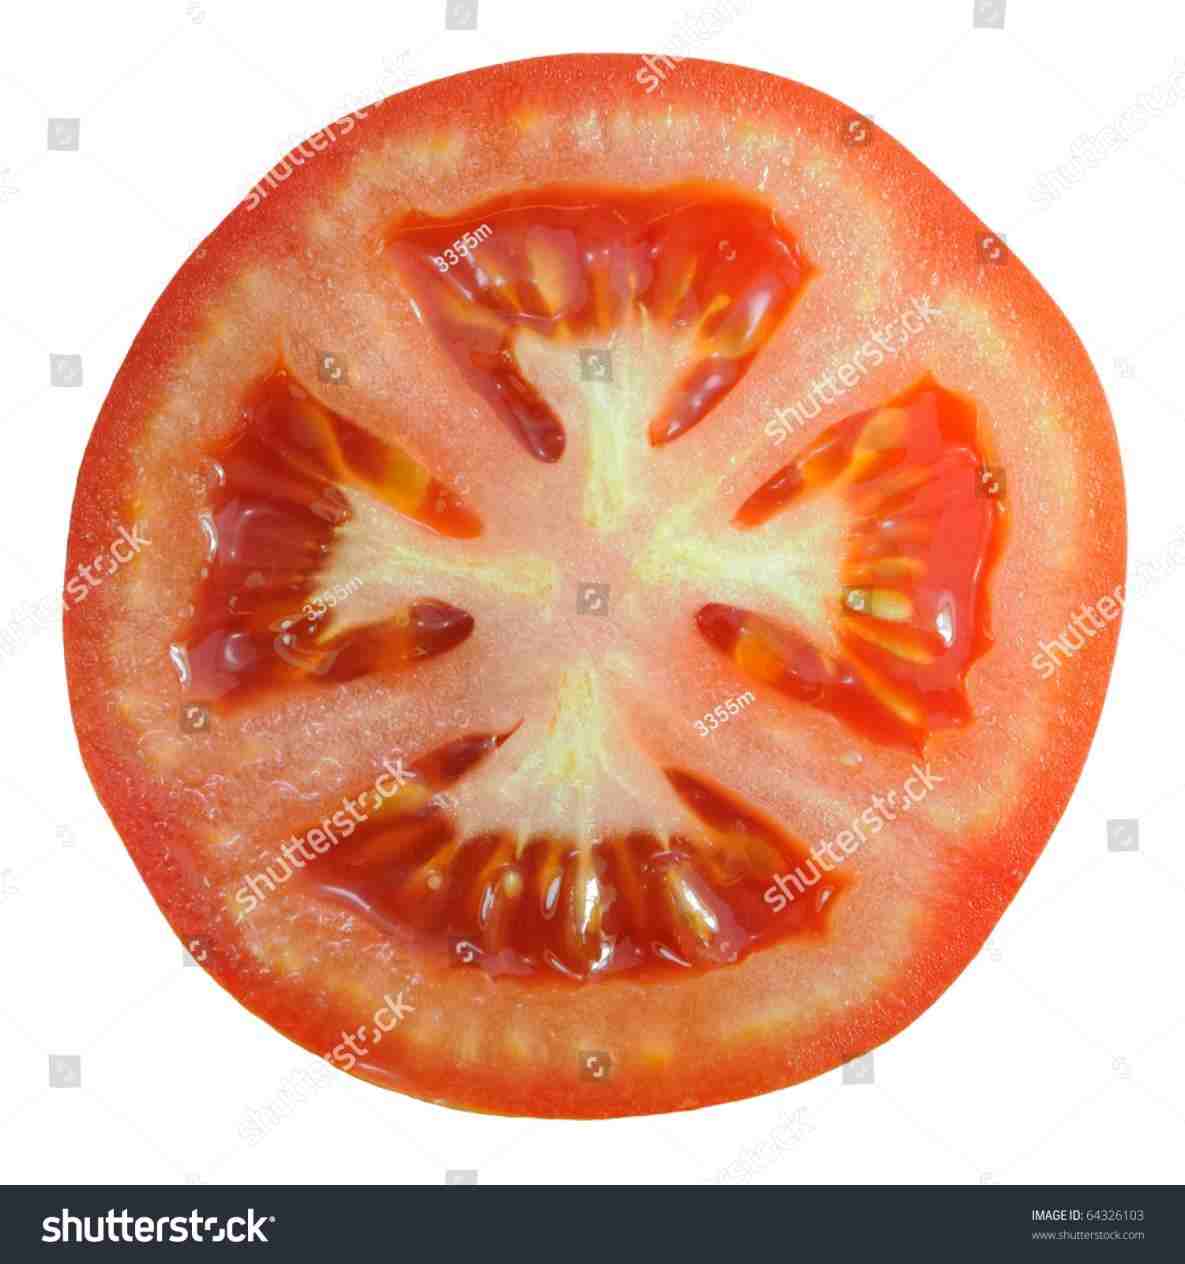 tomatoes clipart tomato wedge